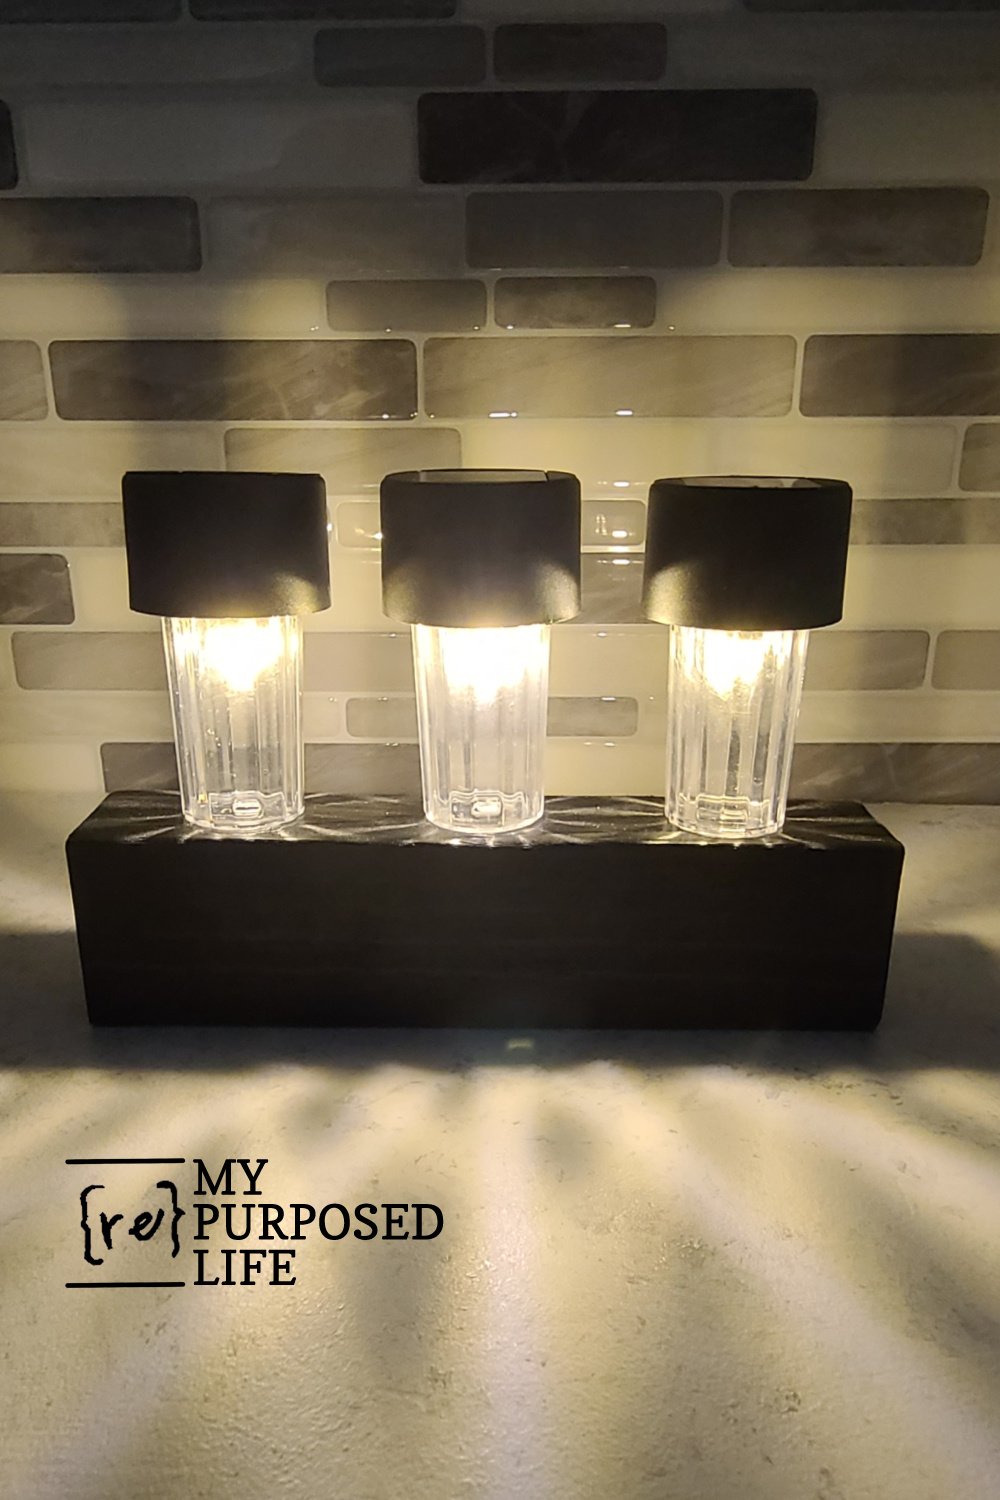 Dollar Store Solar Lights and Scrap wood. Easy project for beginners, so many possibilities for using this kind of light feature. #MyRepurposedLife #solar #lightfeature via @repurposedlife